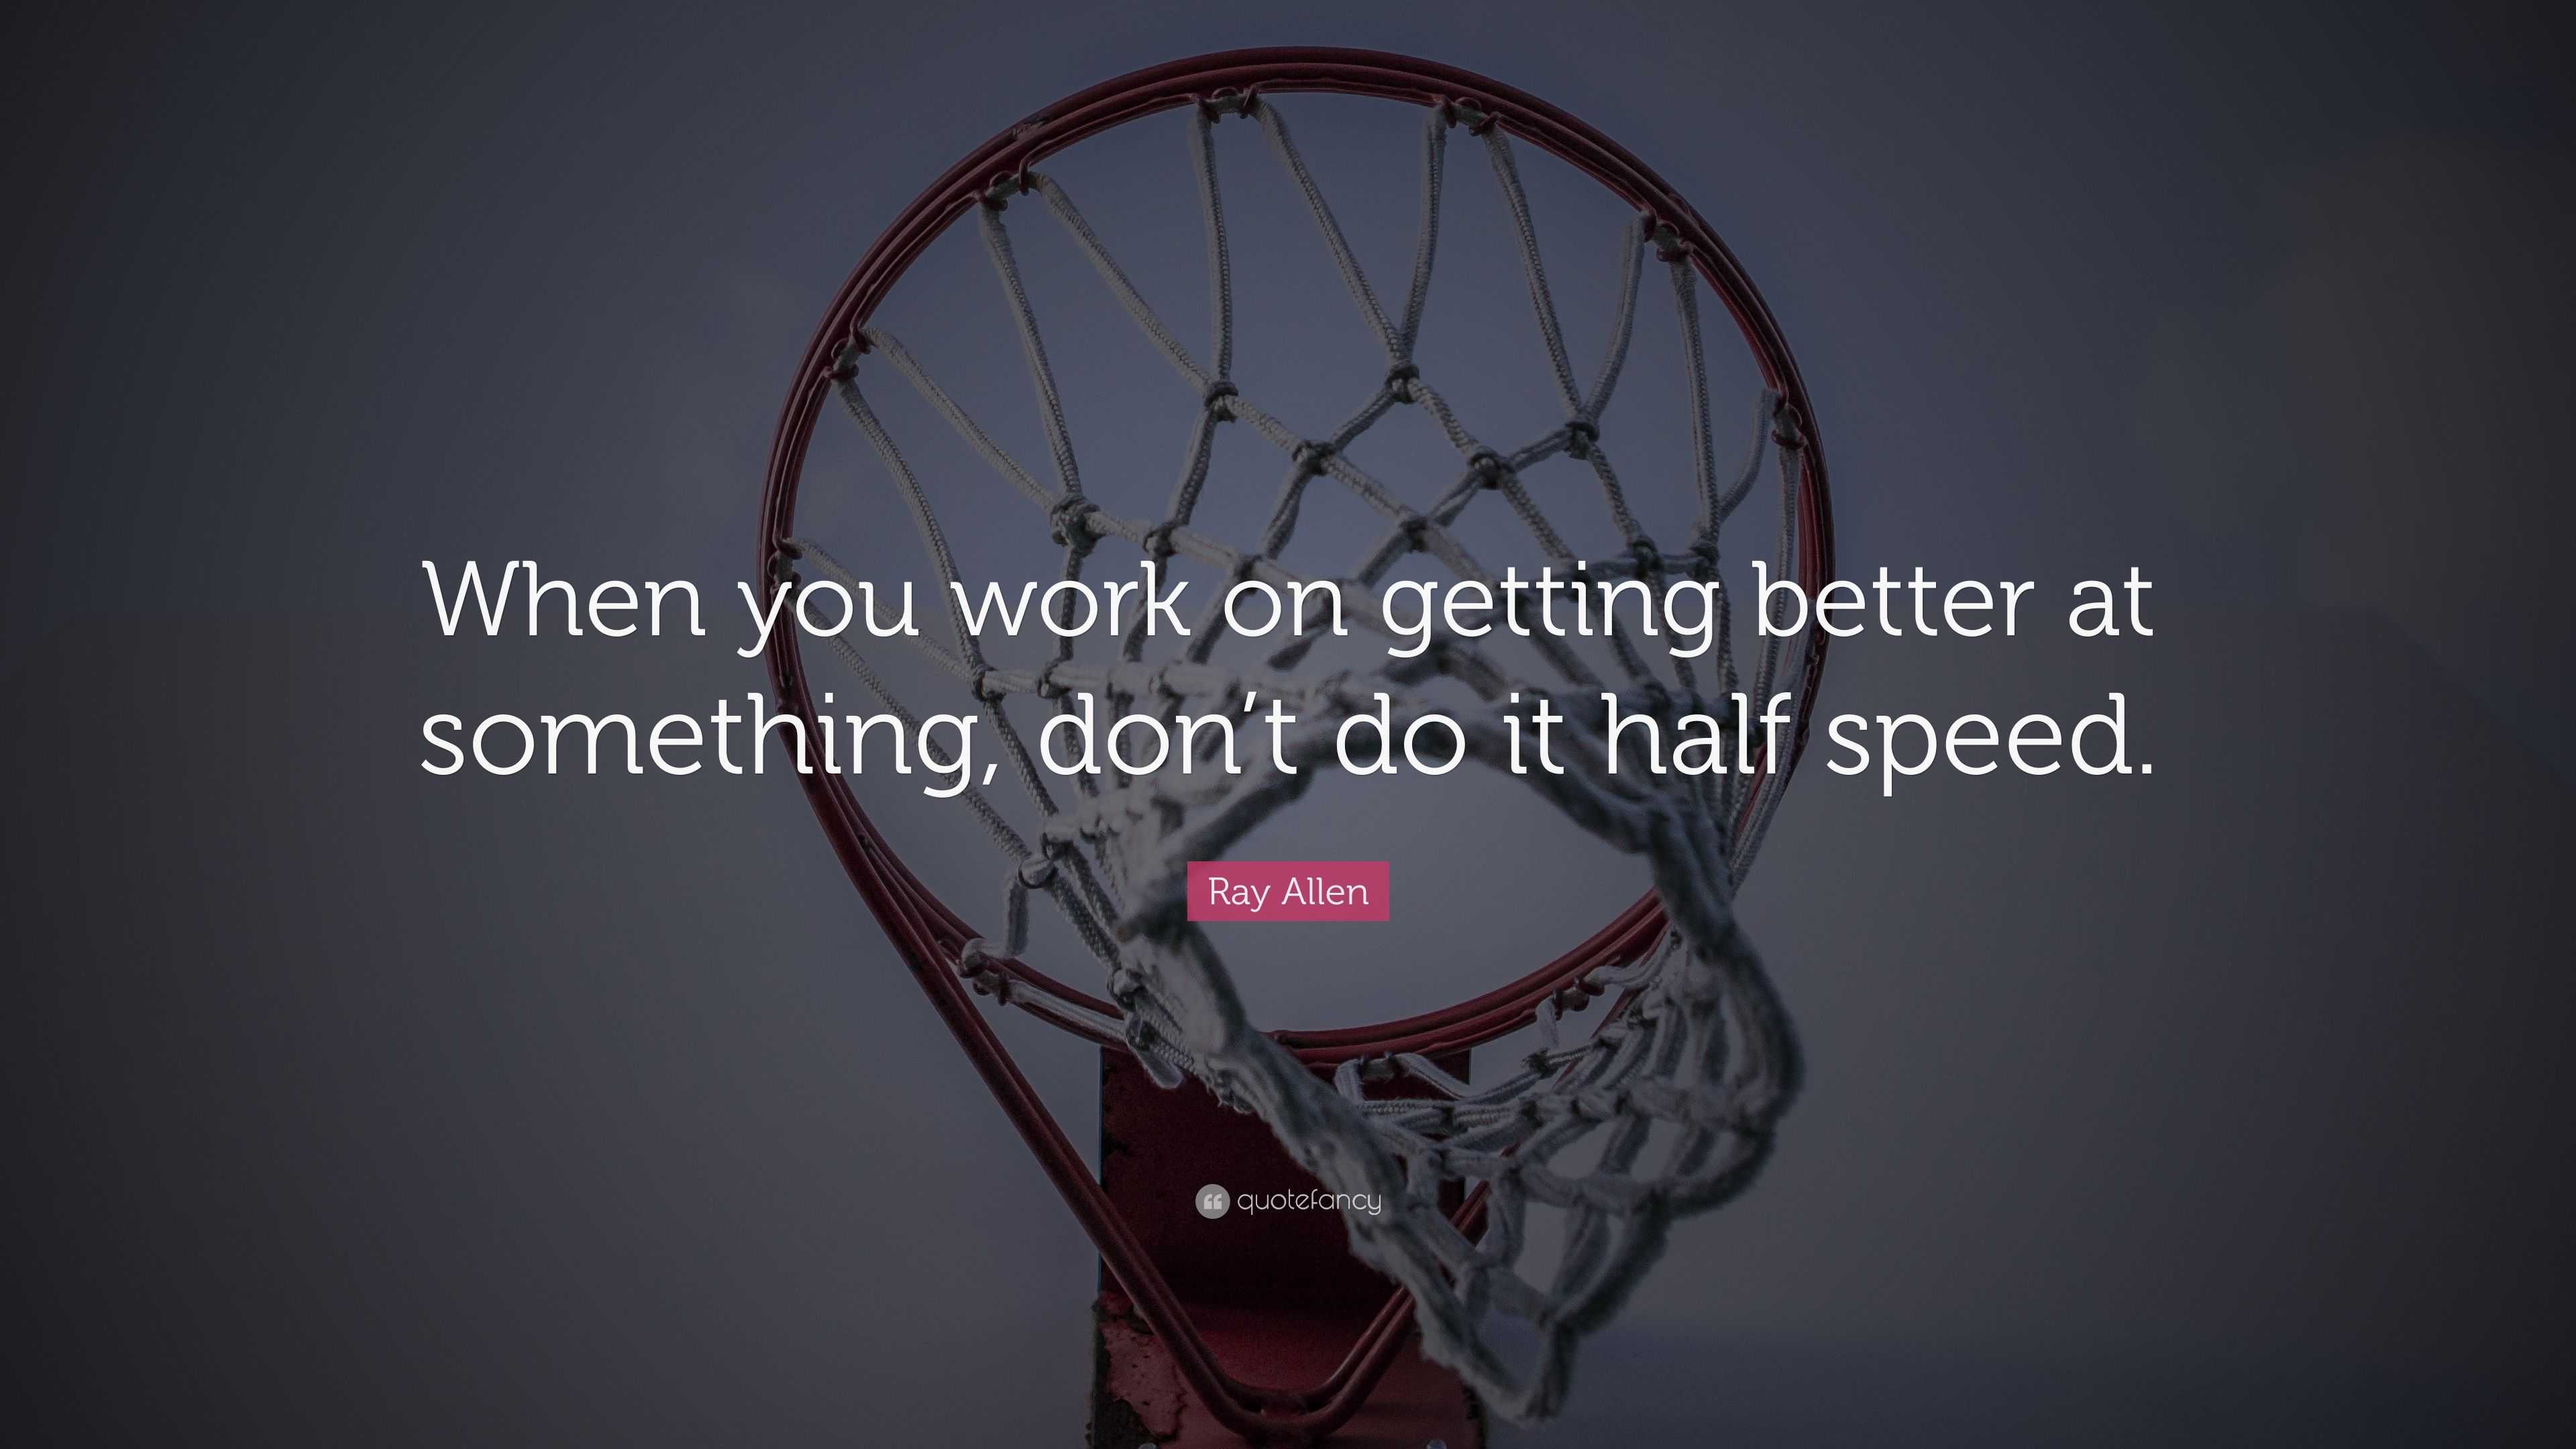 Ray Allen Quote: “When you work on getting better at something, don’t ...